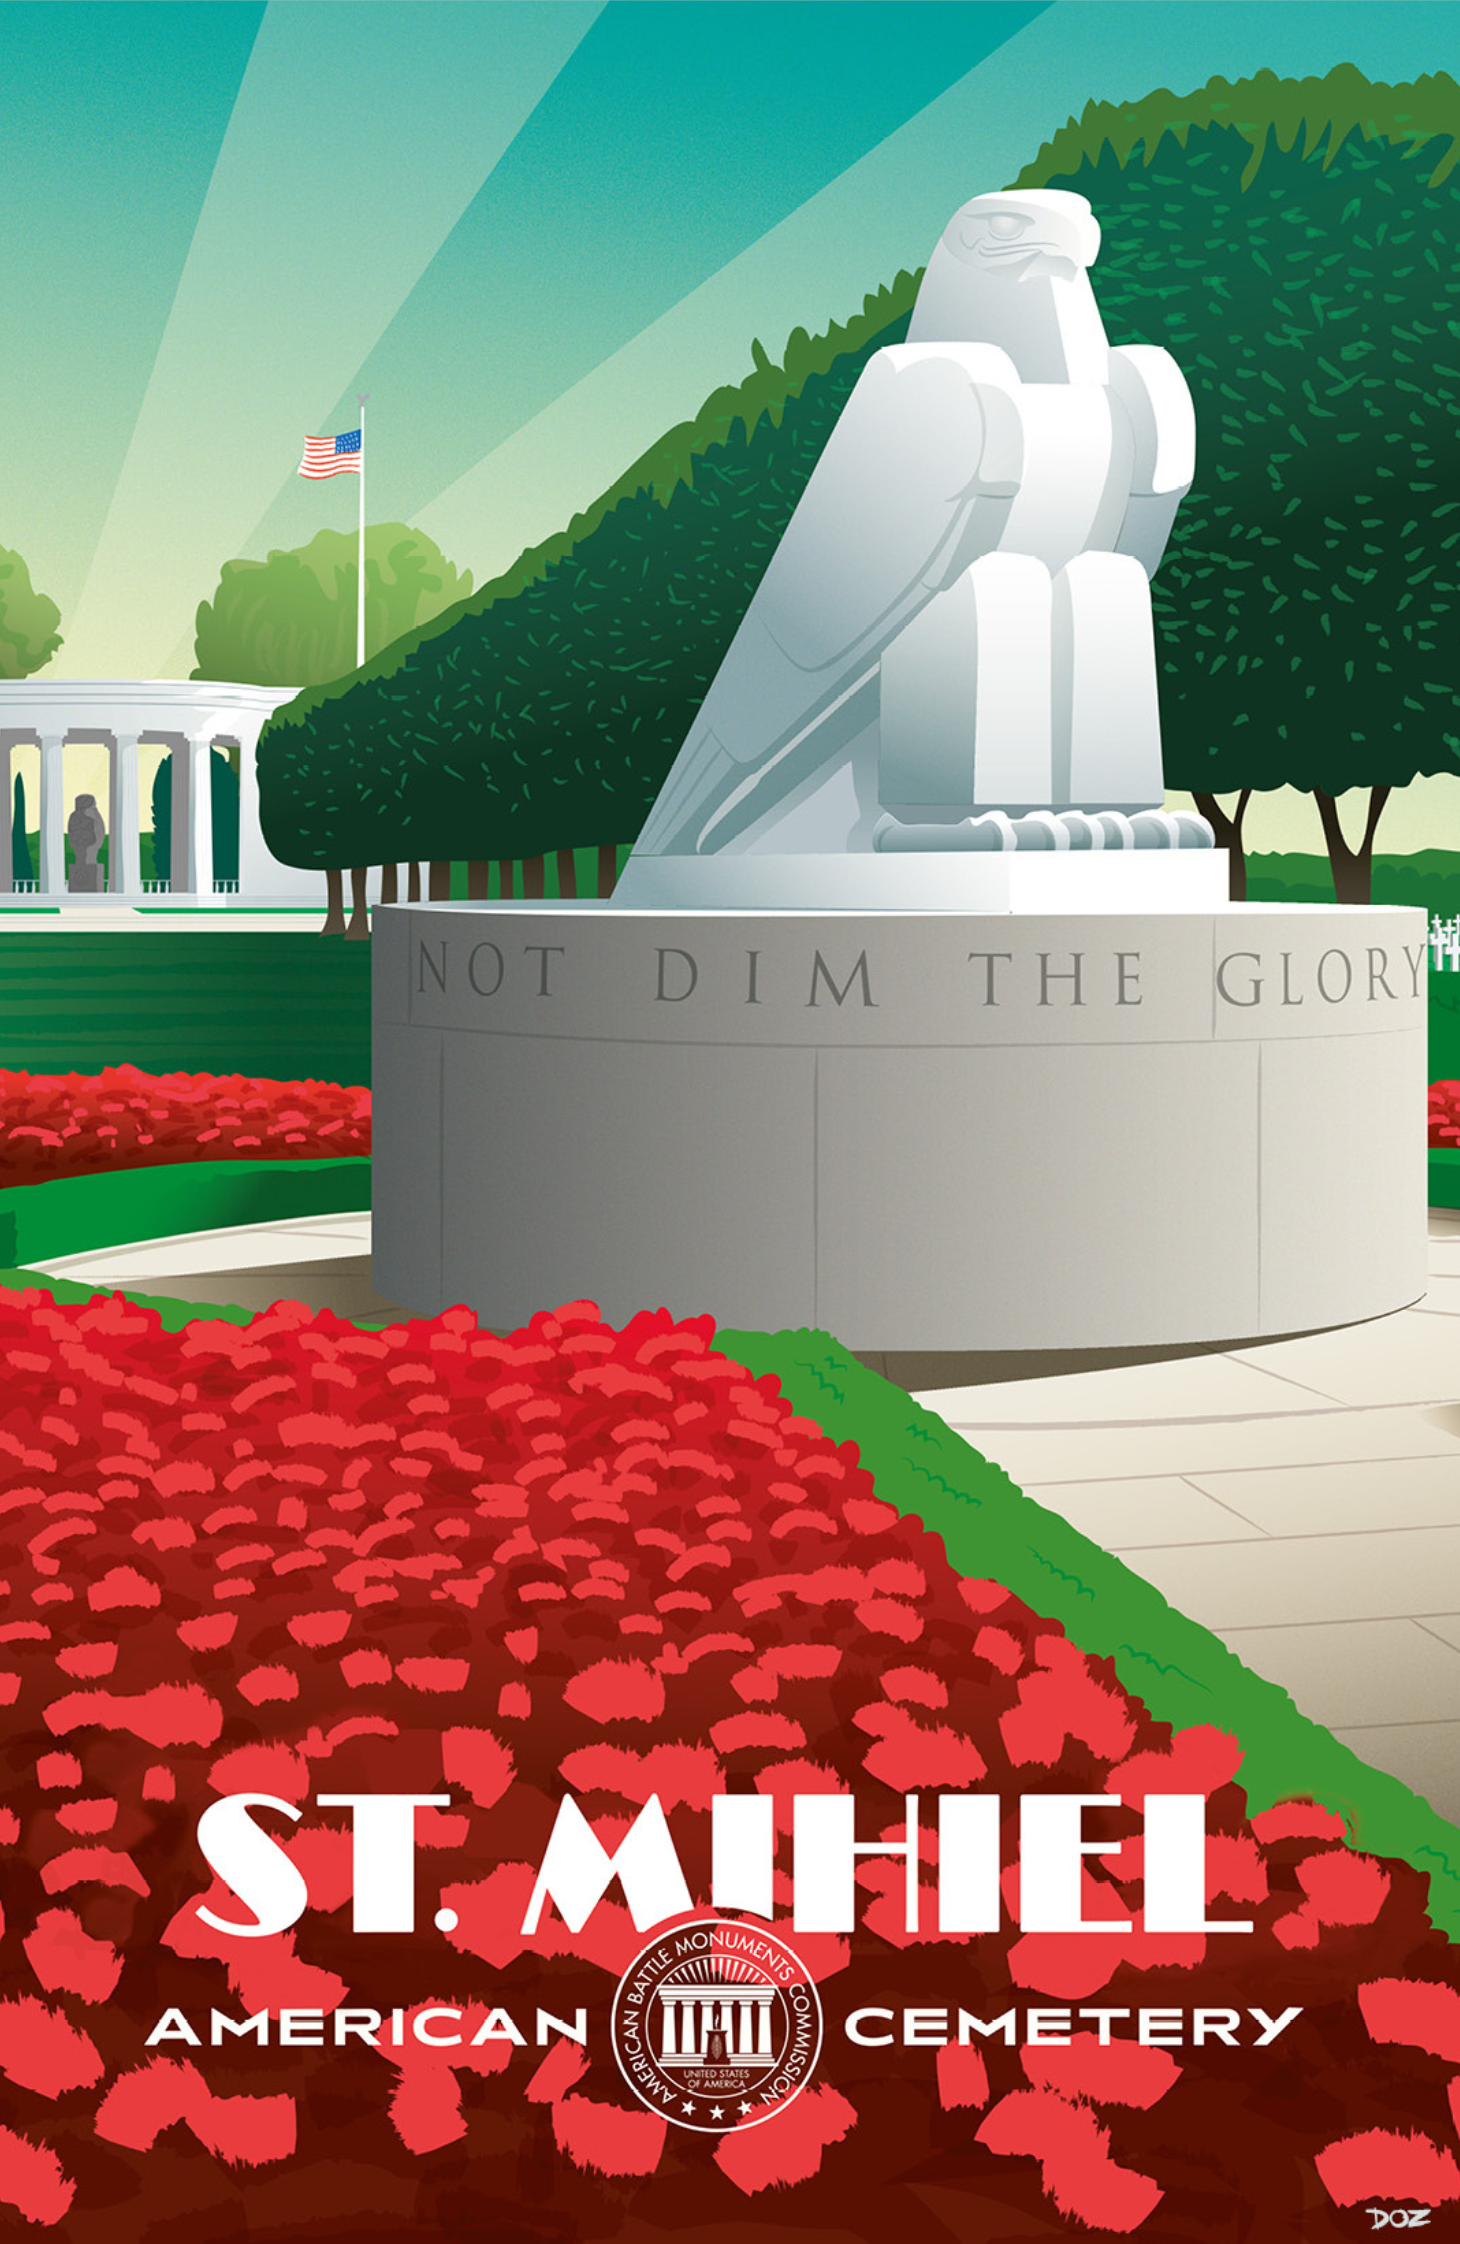 Vintage poster of St. Mihiel American Cemetery created to mark ABMC Centennial